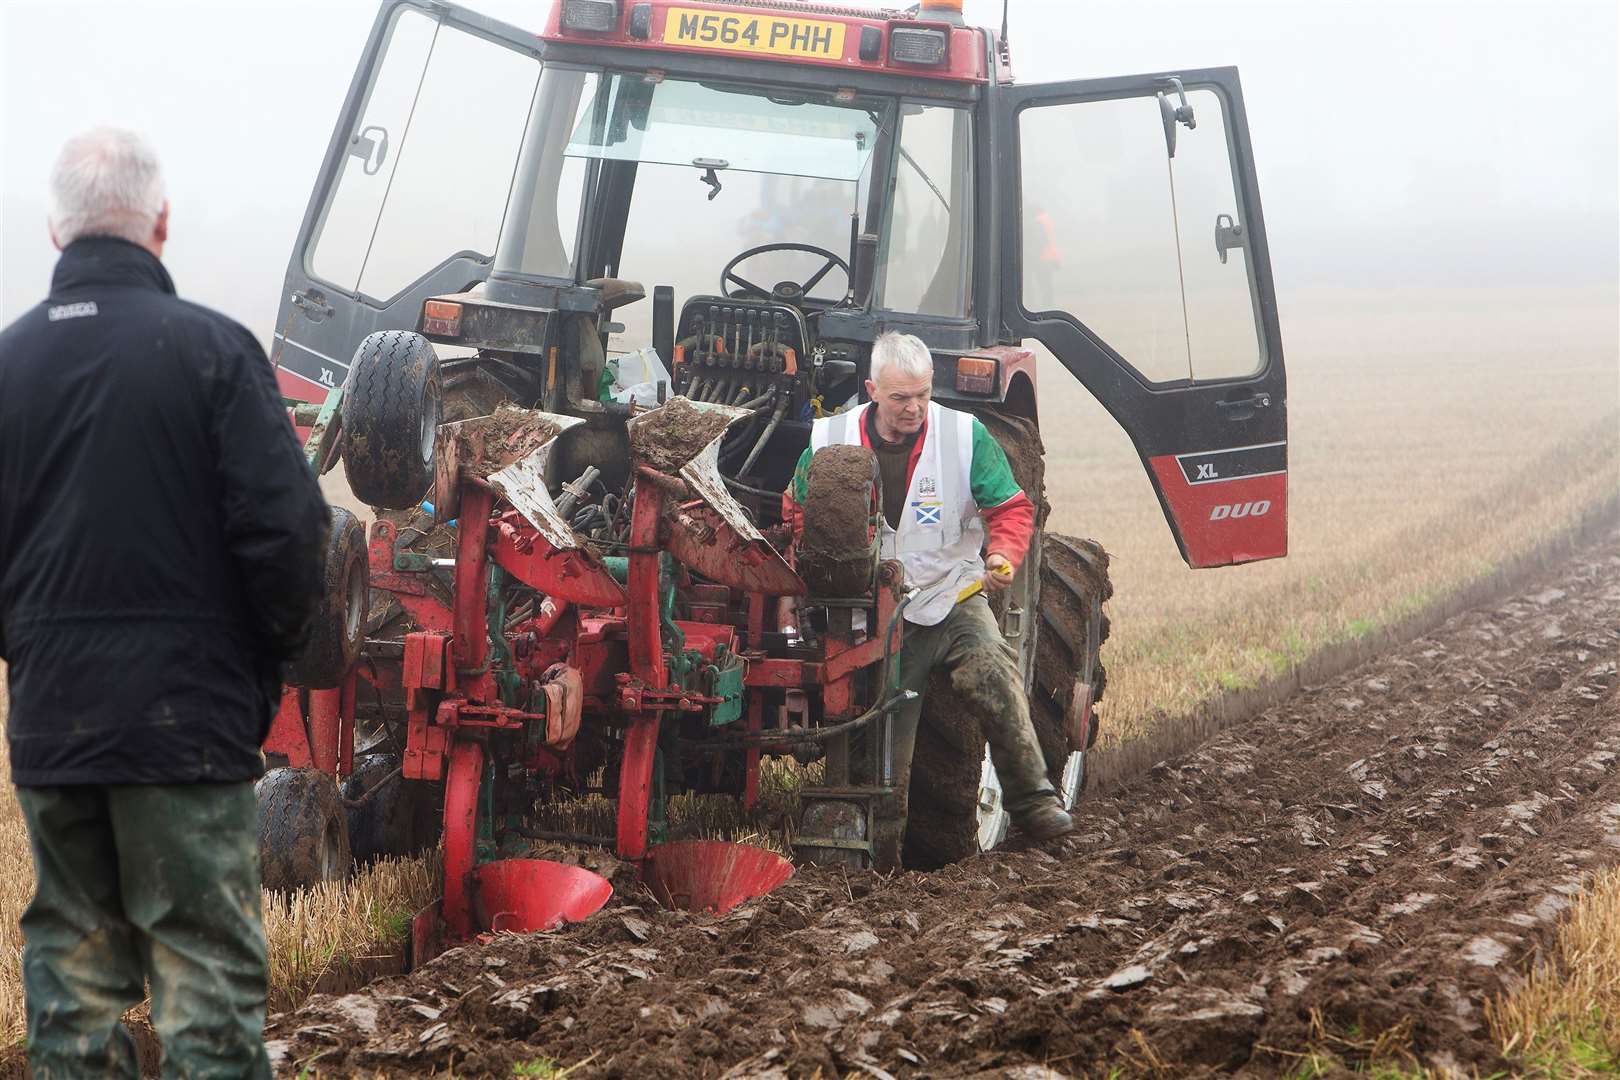 James won in the reversible ploughing section at last year's Scottish Ploughing Championships held at Stanstill. Photo: Robert MacDonald/Northern Studios